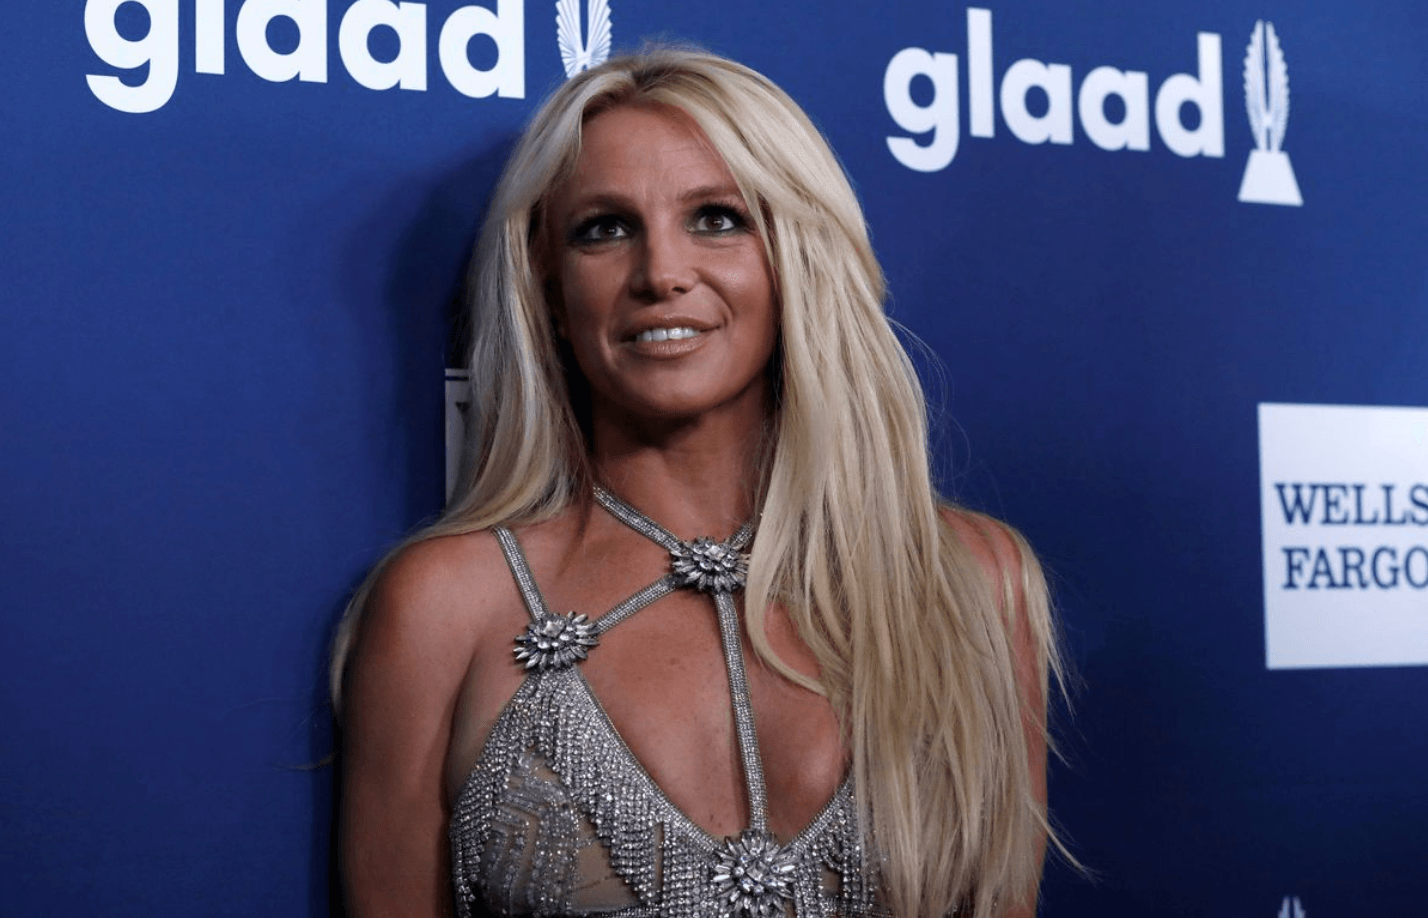 Tearful Britney Spears begs court to oust father as conservator